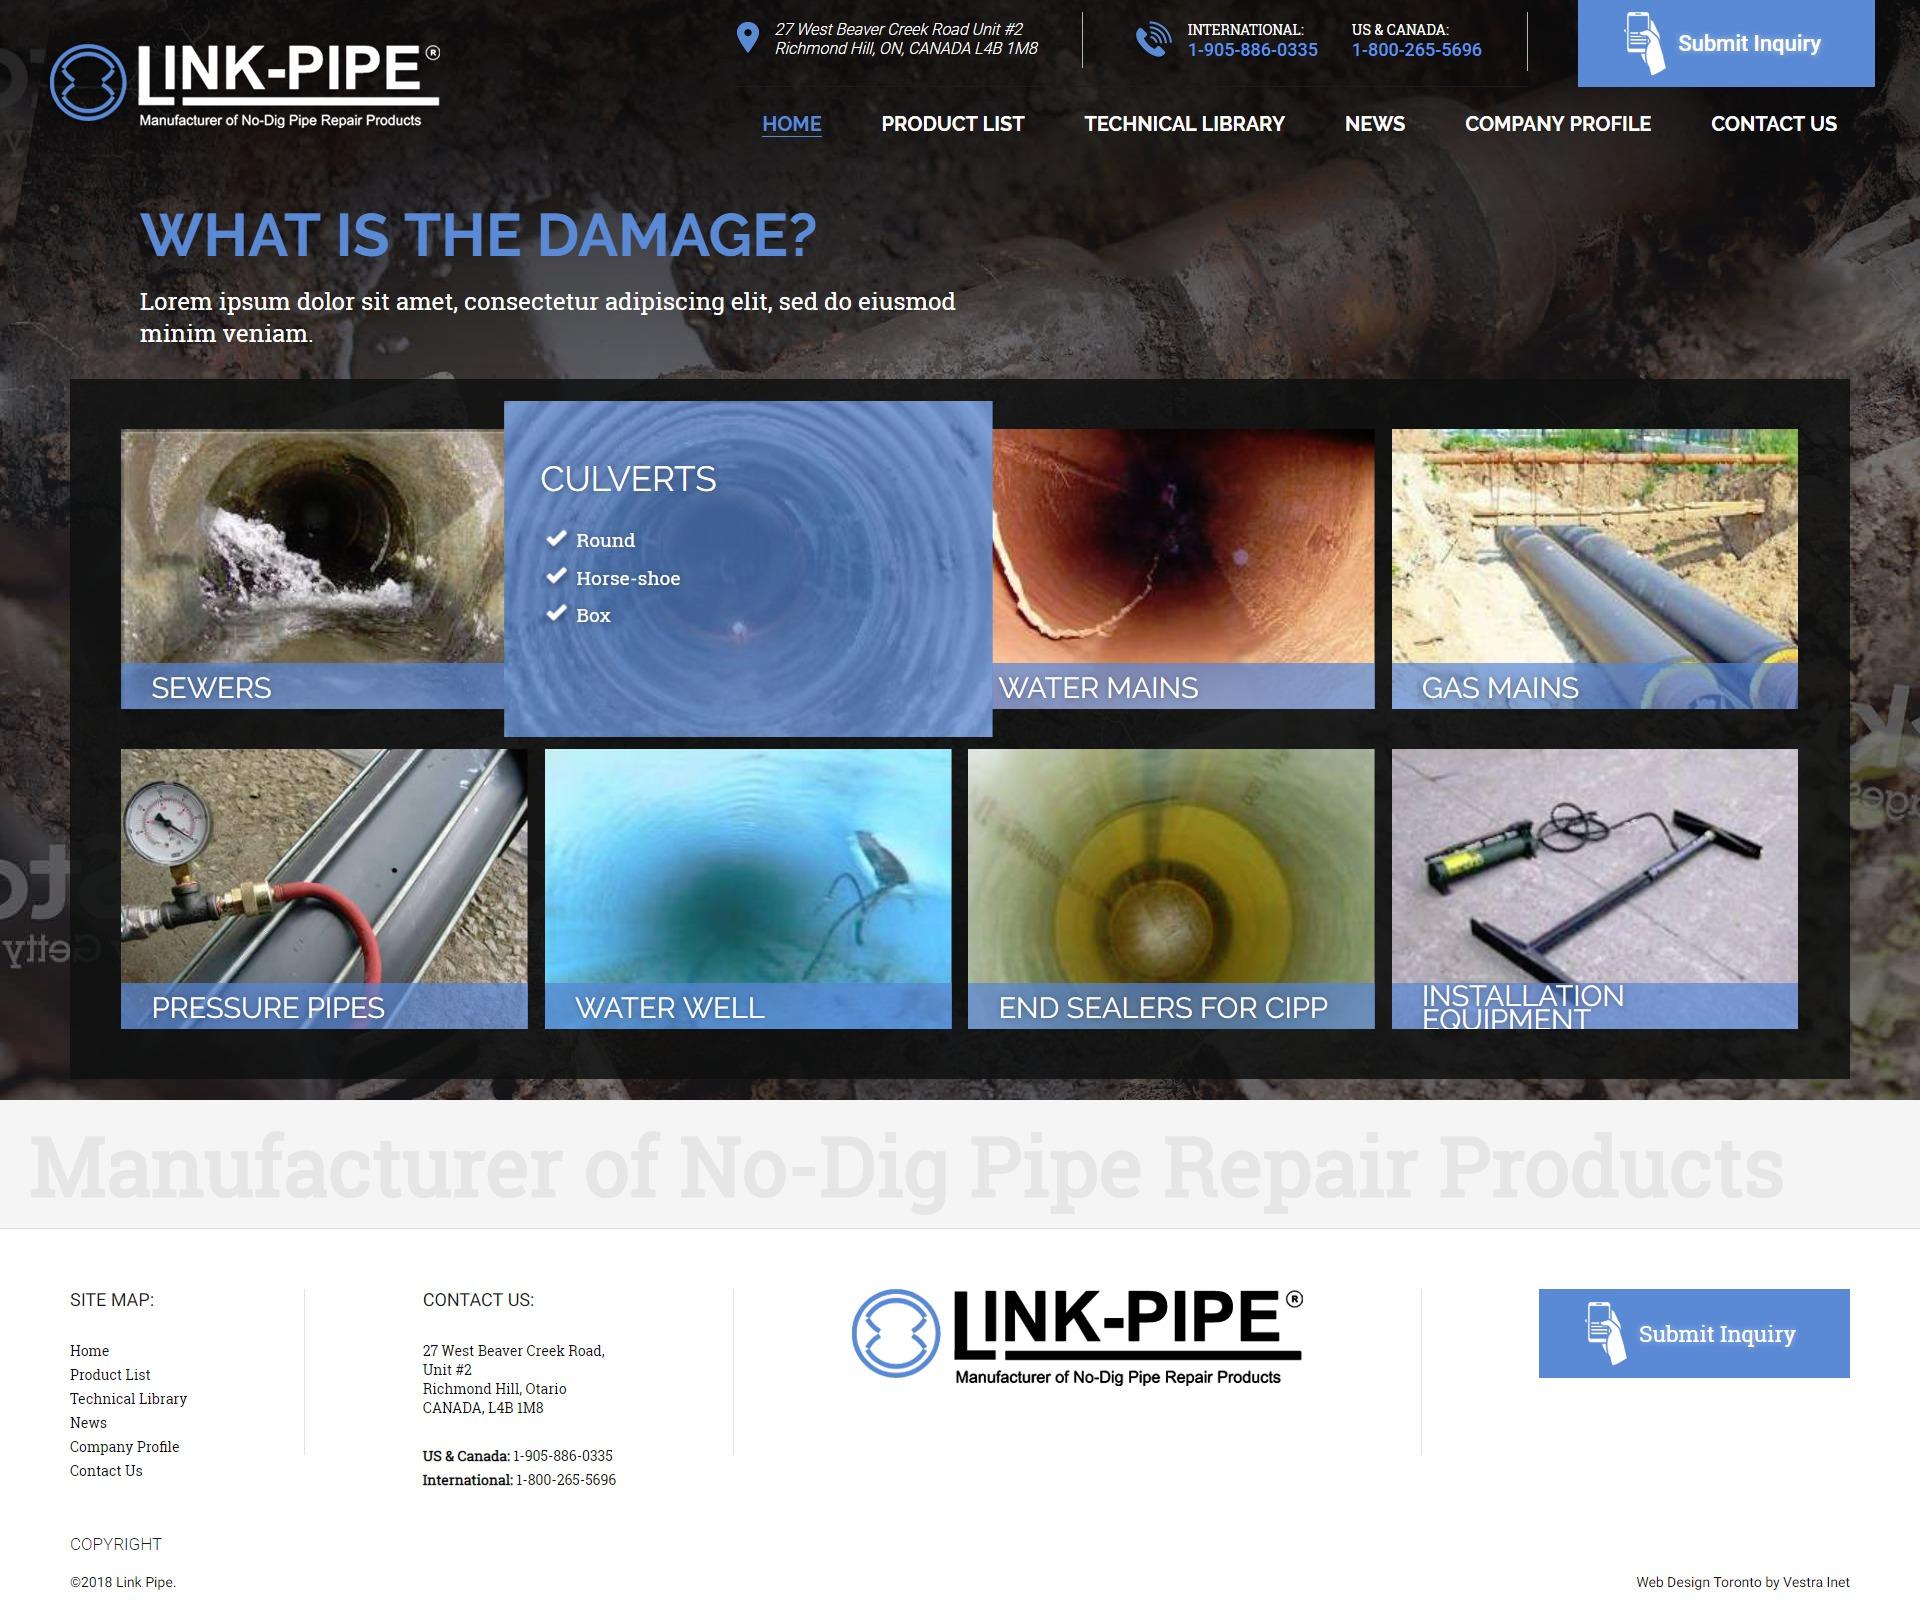 Link-Pipe Incorporated